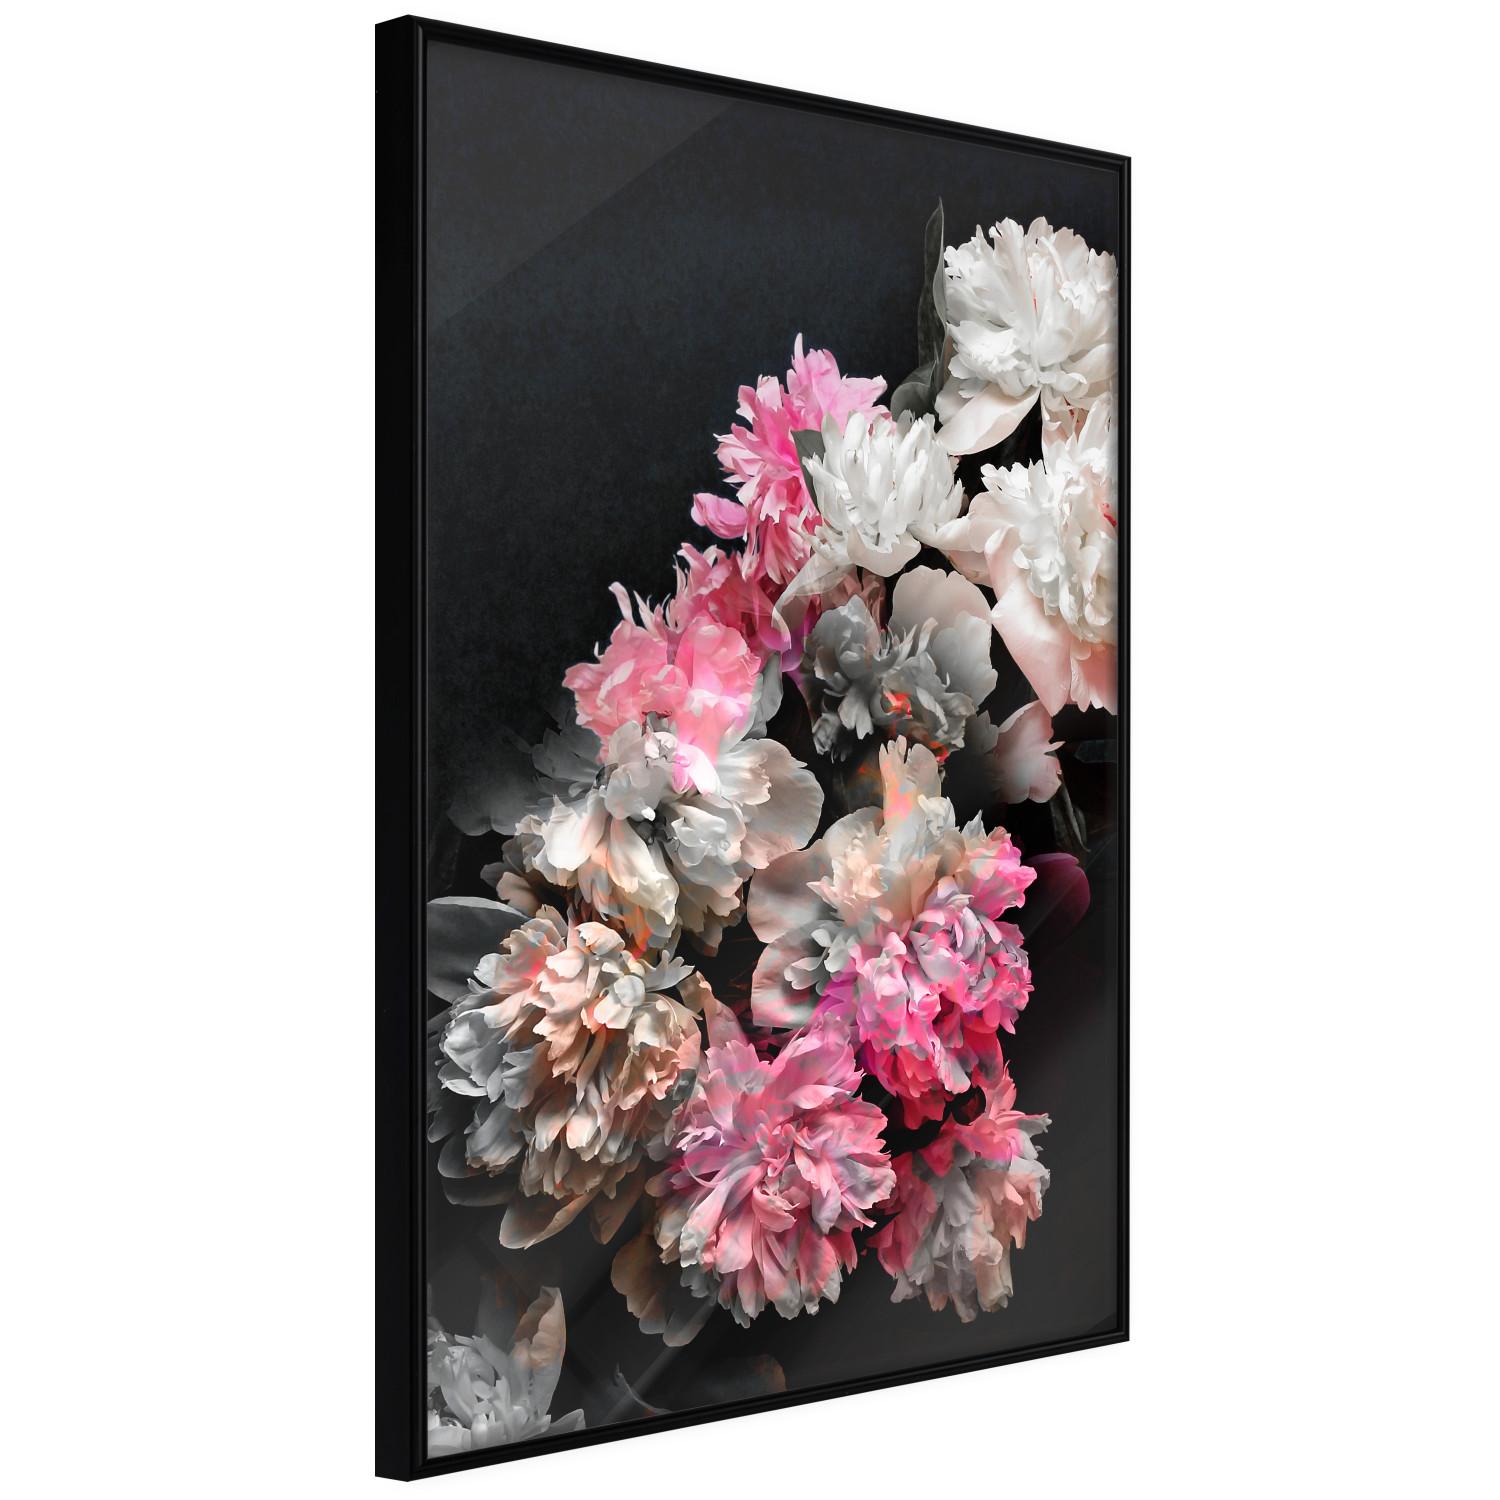 Gallery wall Bouquet in Darkness - composition of colorful flowers on a background of deep black